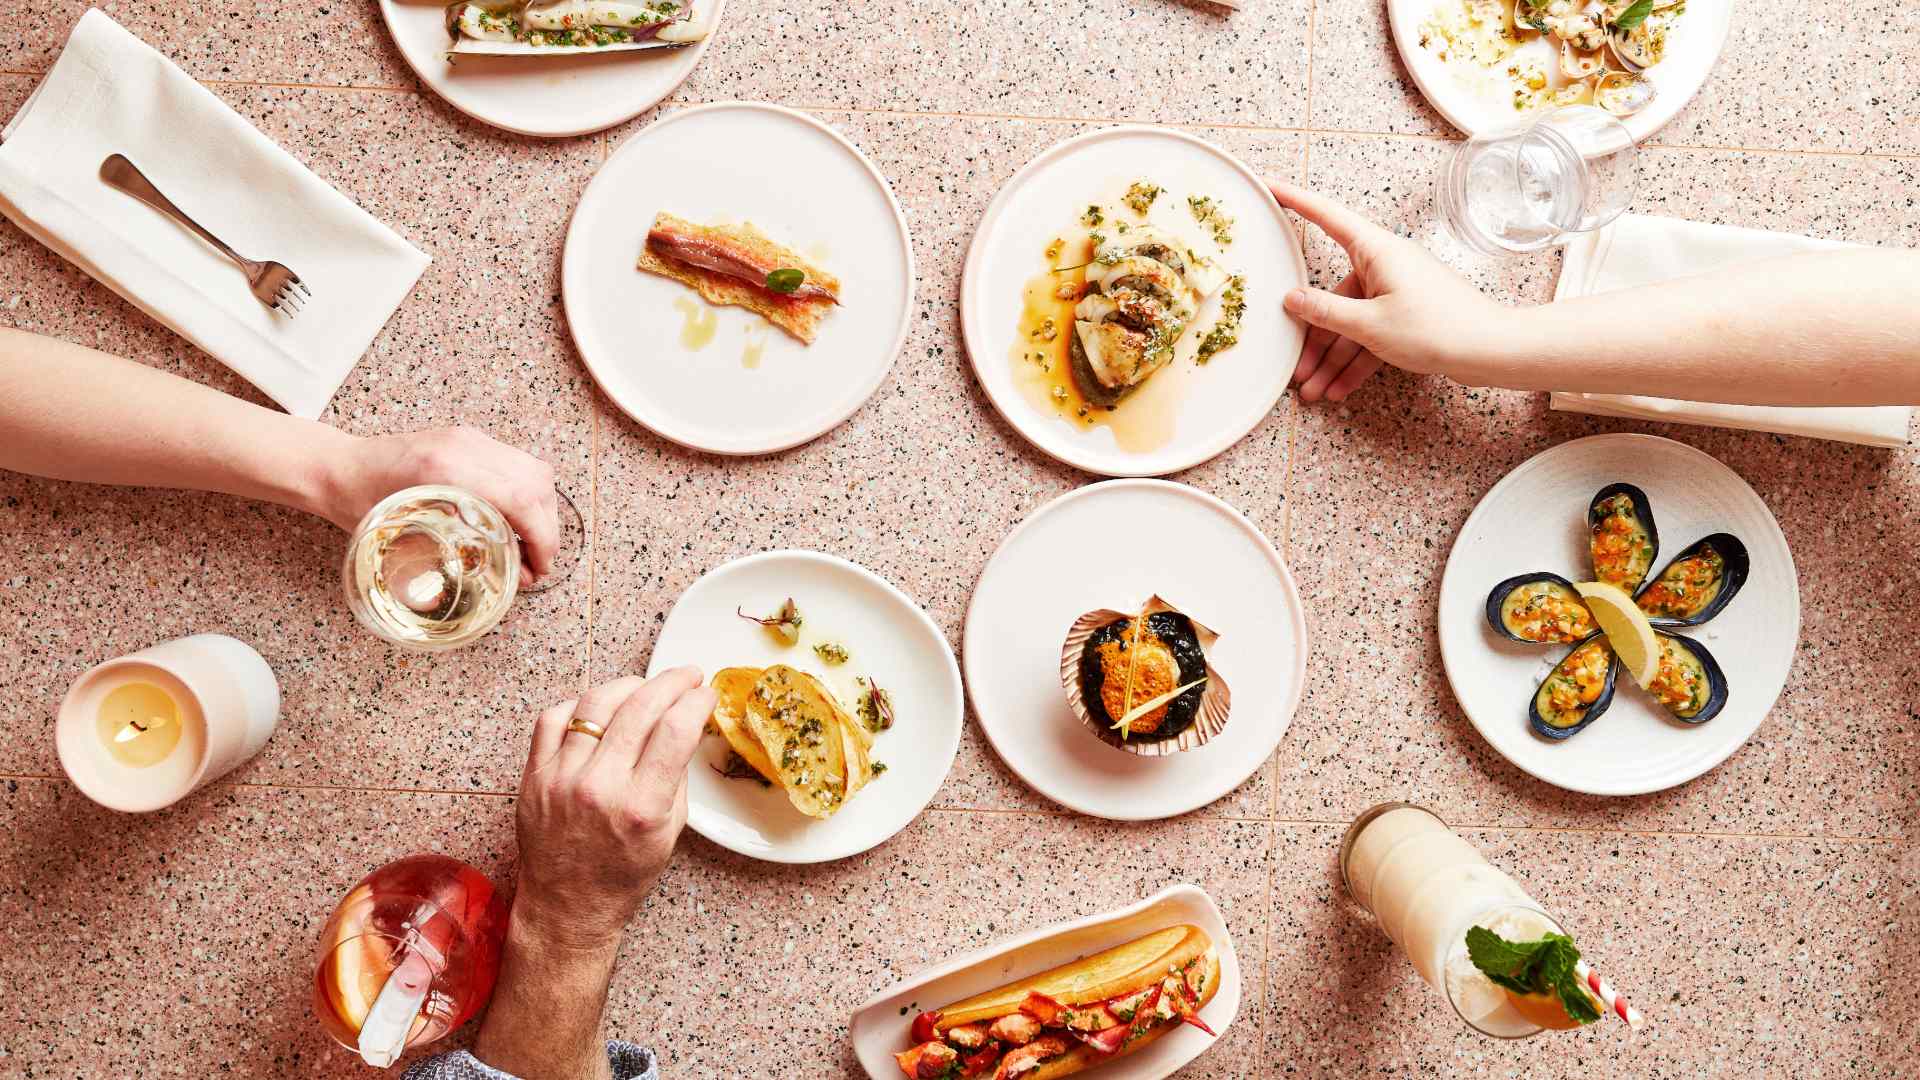 Pinchy's Now Has a Permanent Home for Its Lobster Rolls and Champagne in Melbourne's CBD